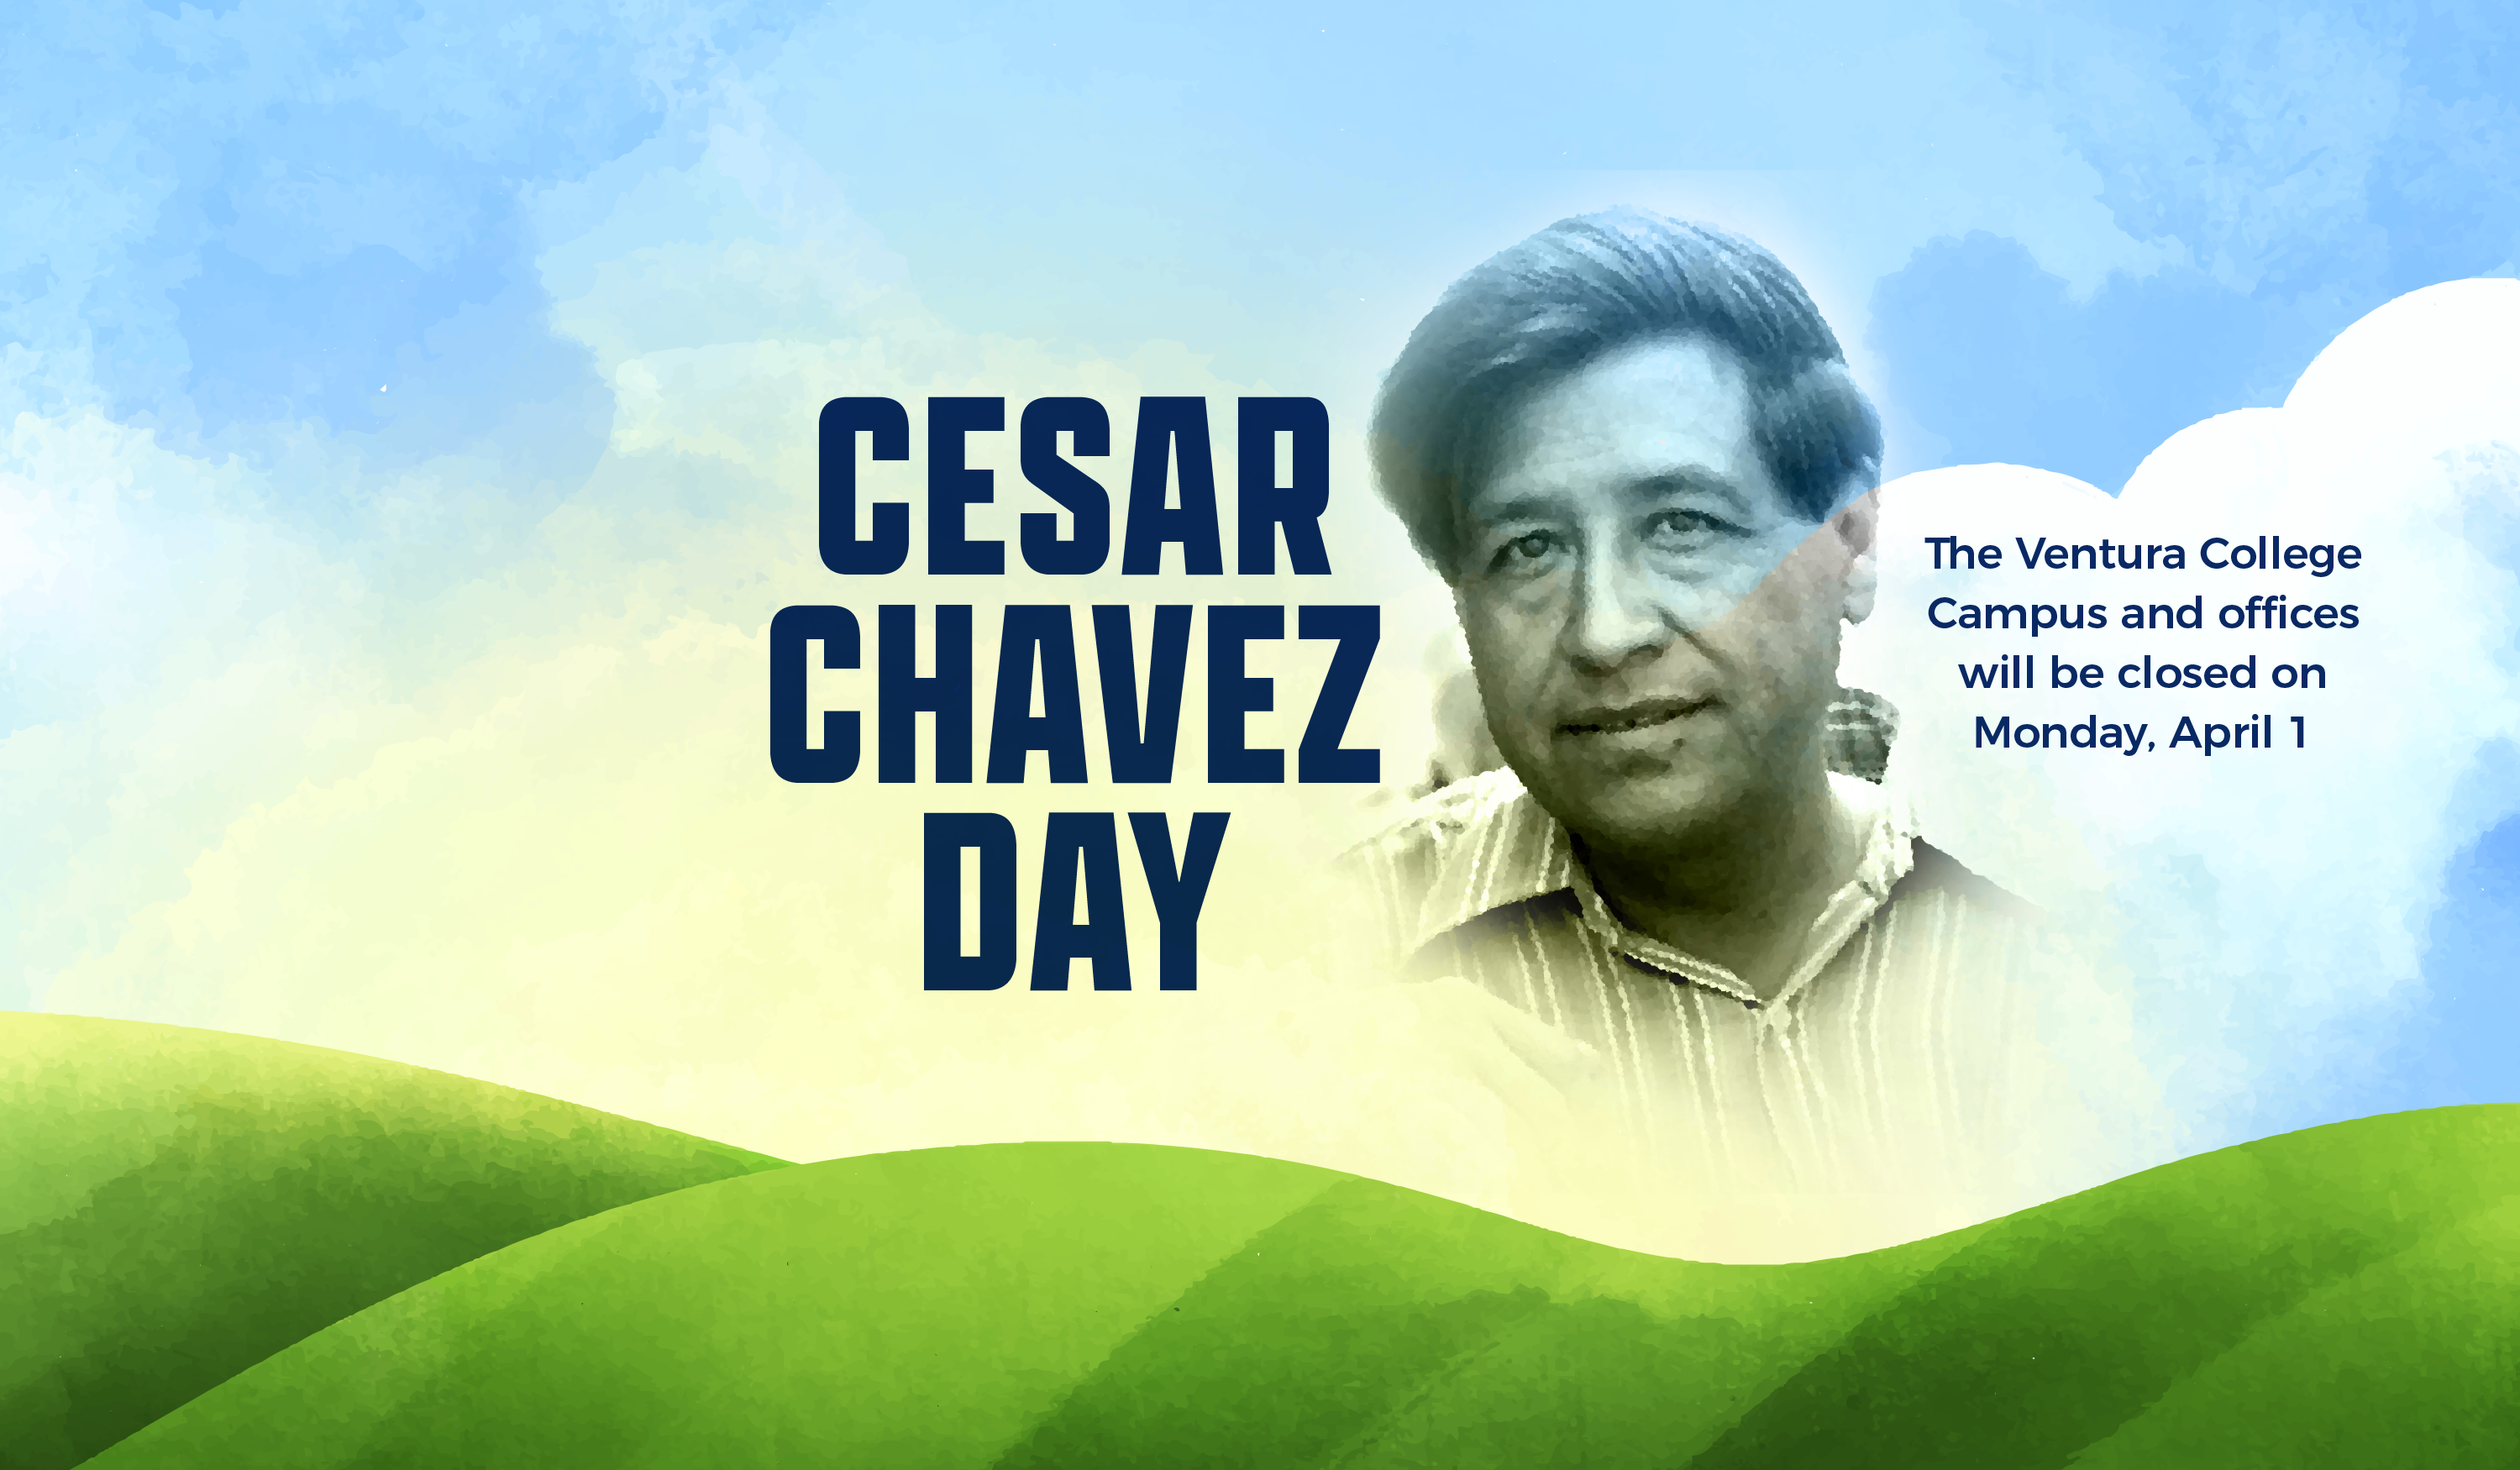 Cesar Chavez Day The Ventura College campus and offices will be closed on Monday April 1